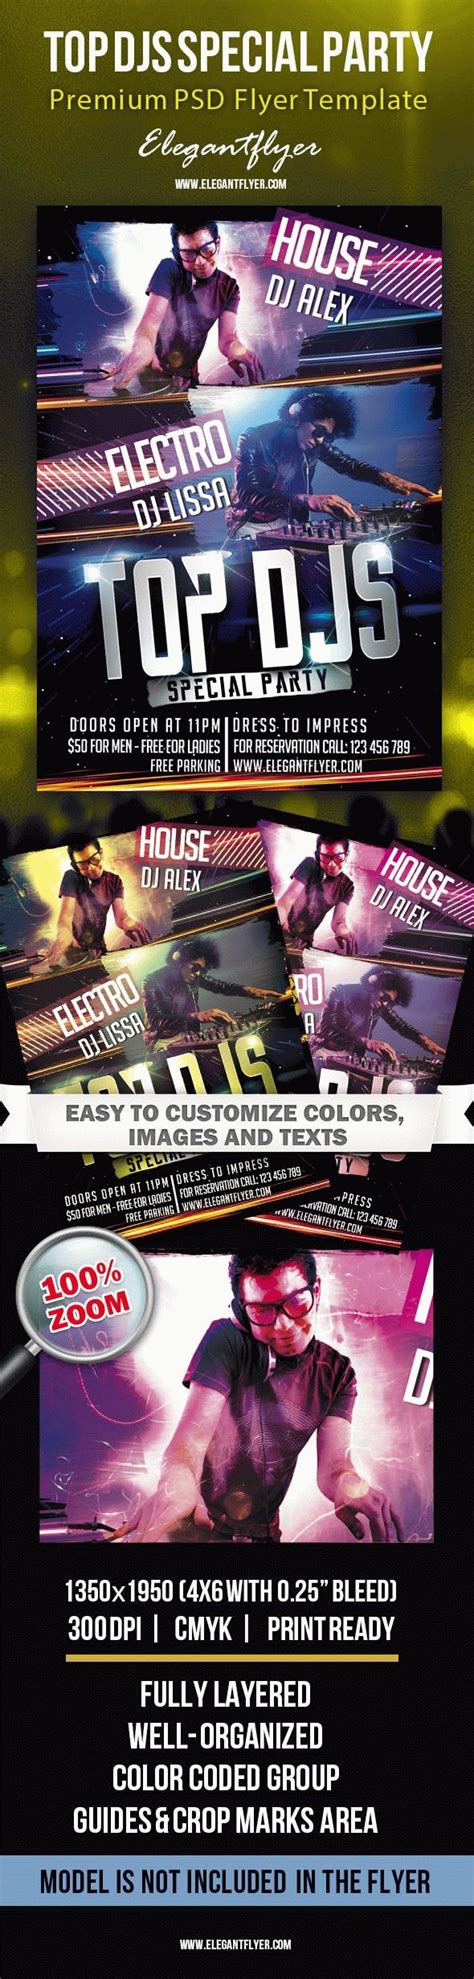 Purple Creative Top Djs Special Party Premium Flyer Template Psd By